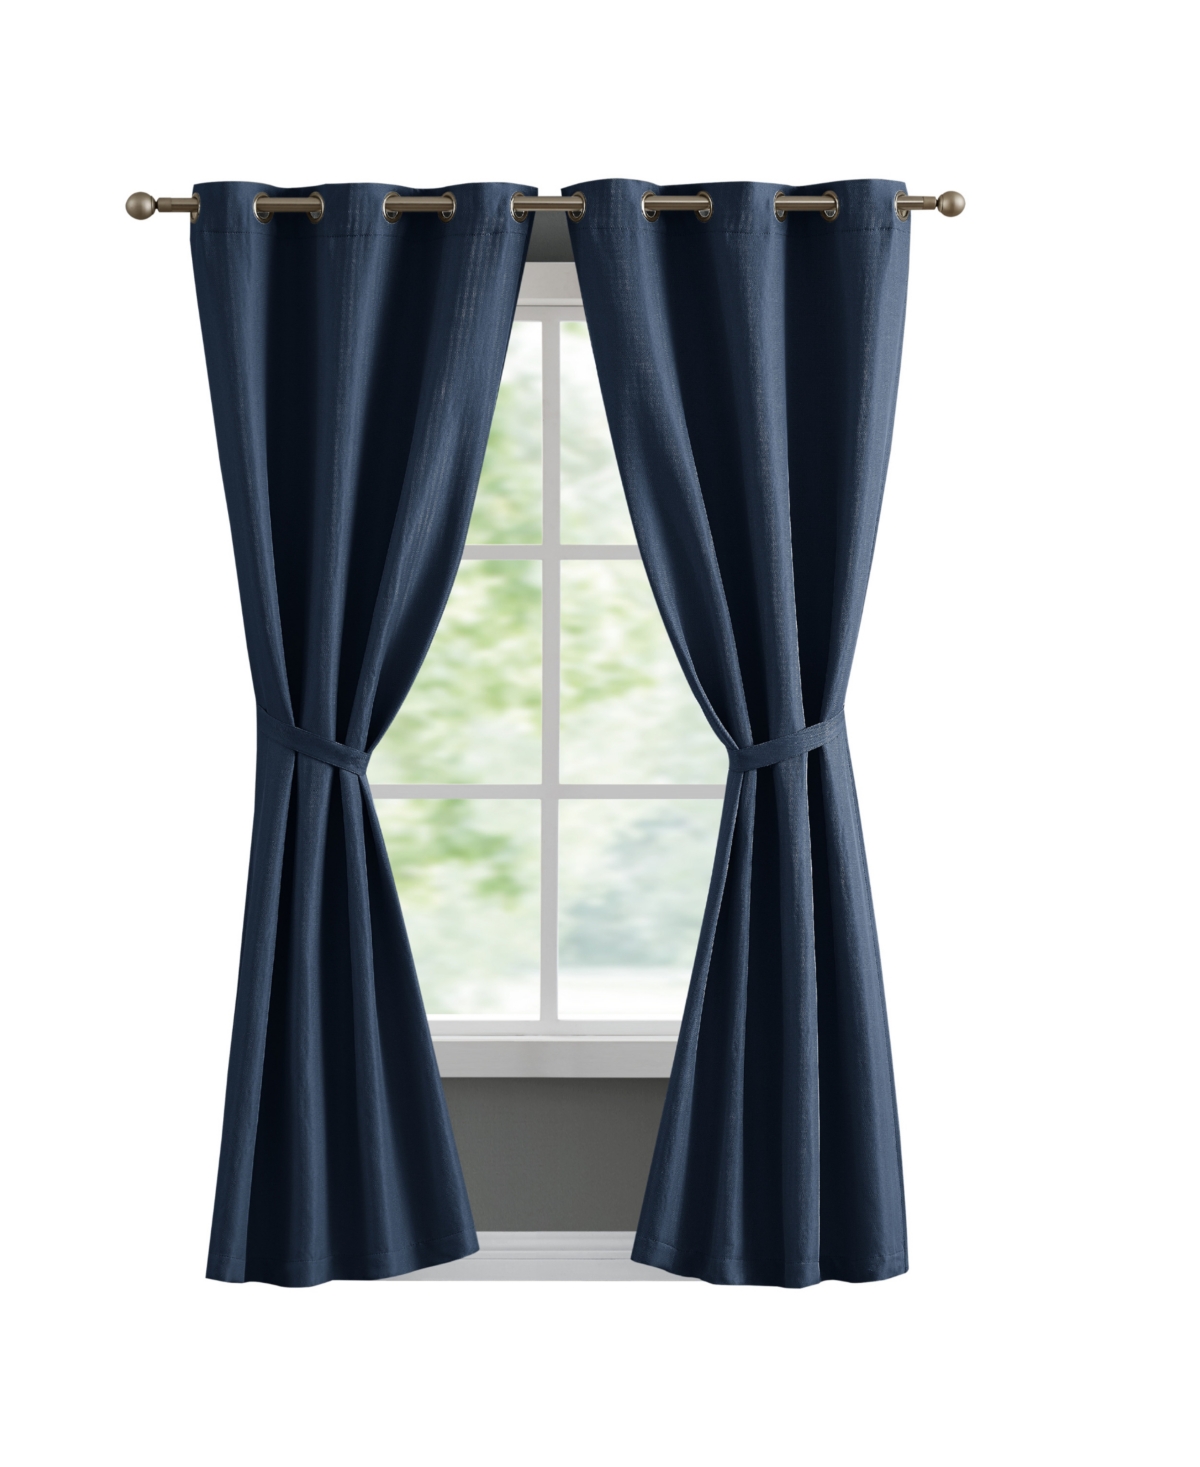 French Connection Tanner Thermal Woven Room Darkening Grommet Window Curtain Panel Pair With Tiebacks, 38" X 84" In Blue